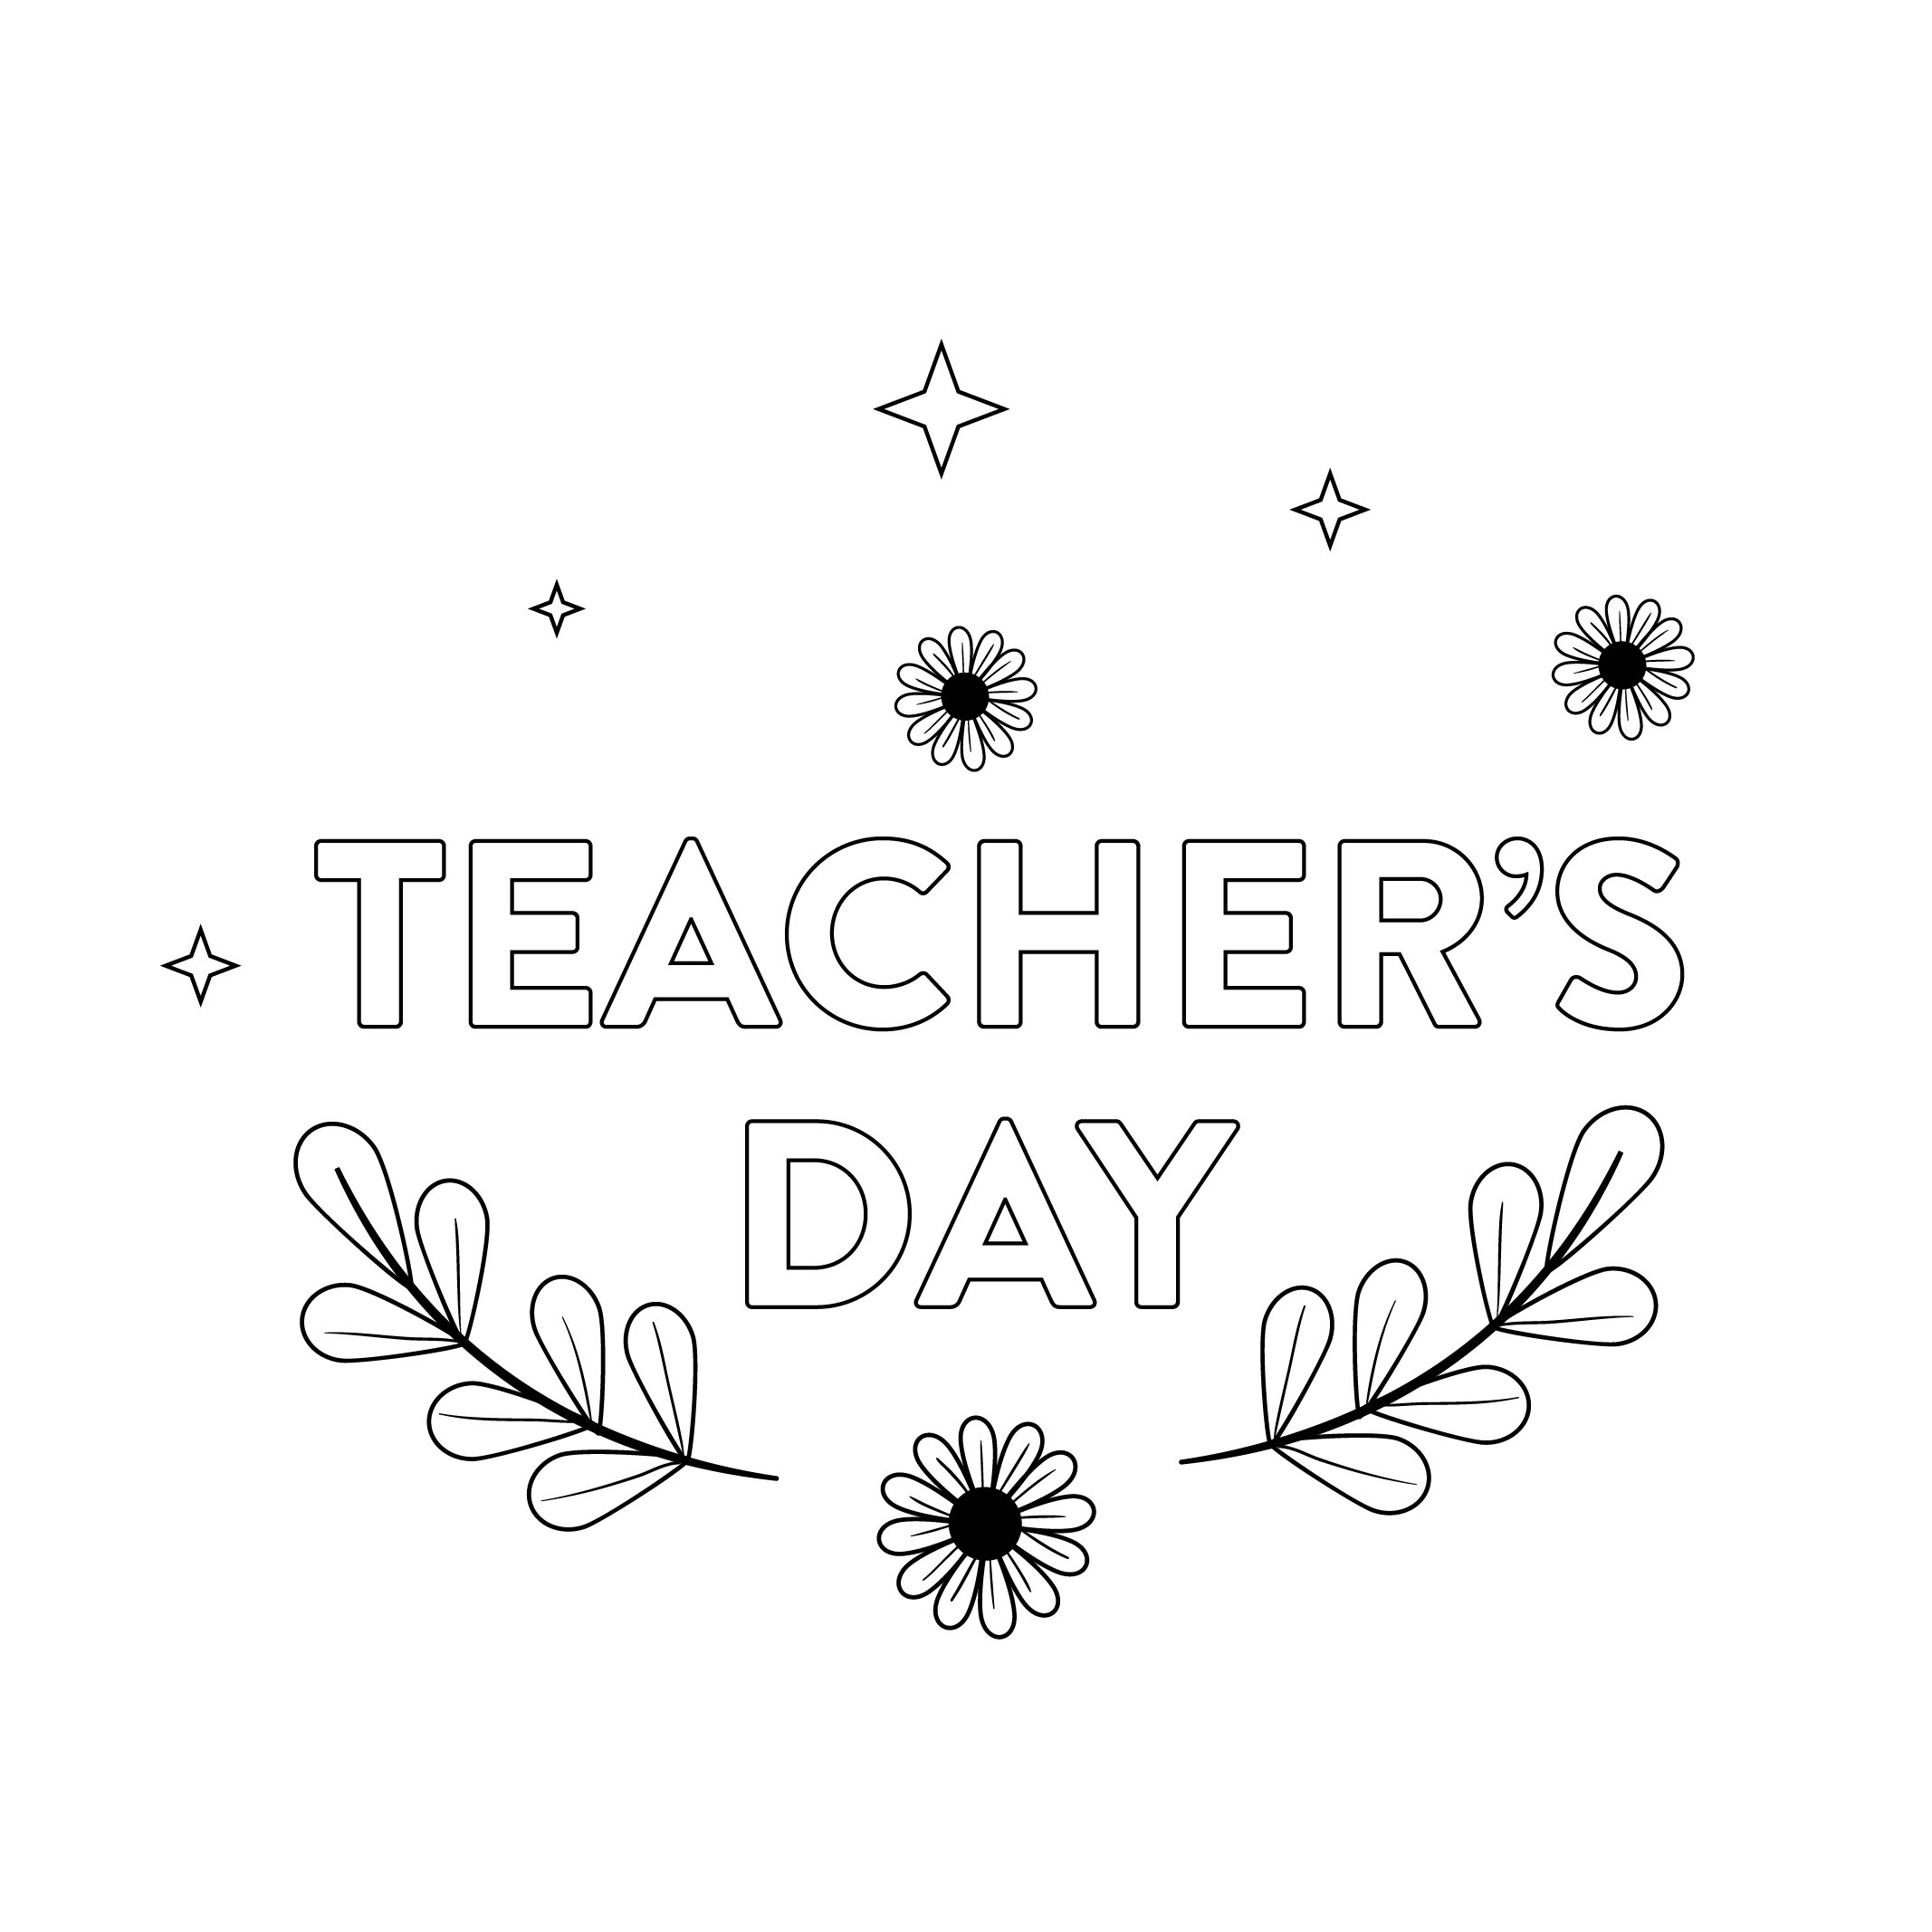 Teacher's Day Drawing Template in Illustrator, Vector, Image - FREE  Download | Template.net